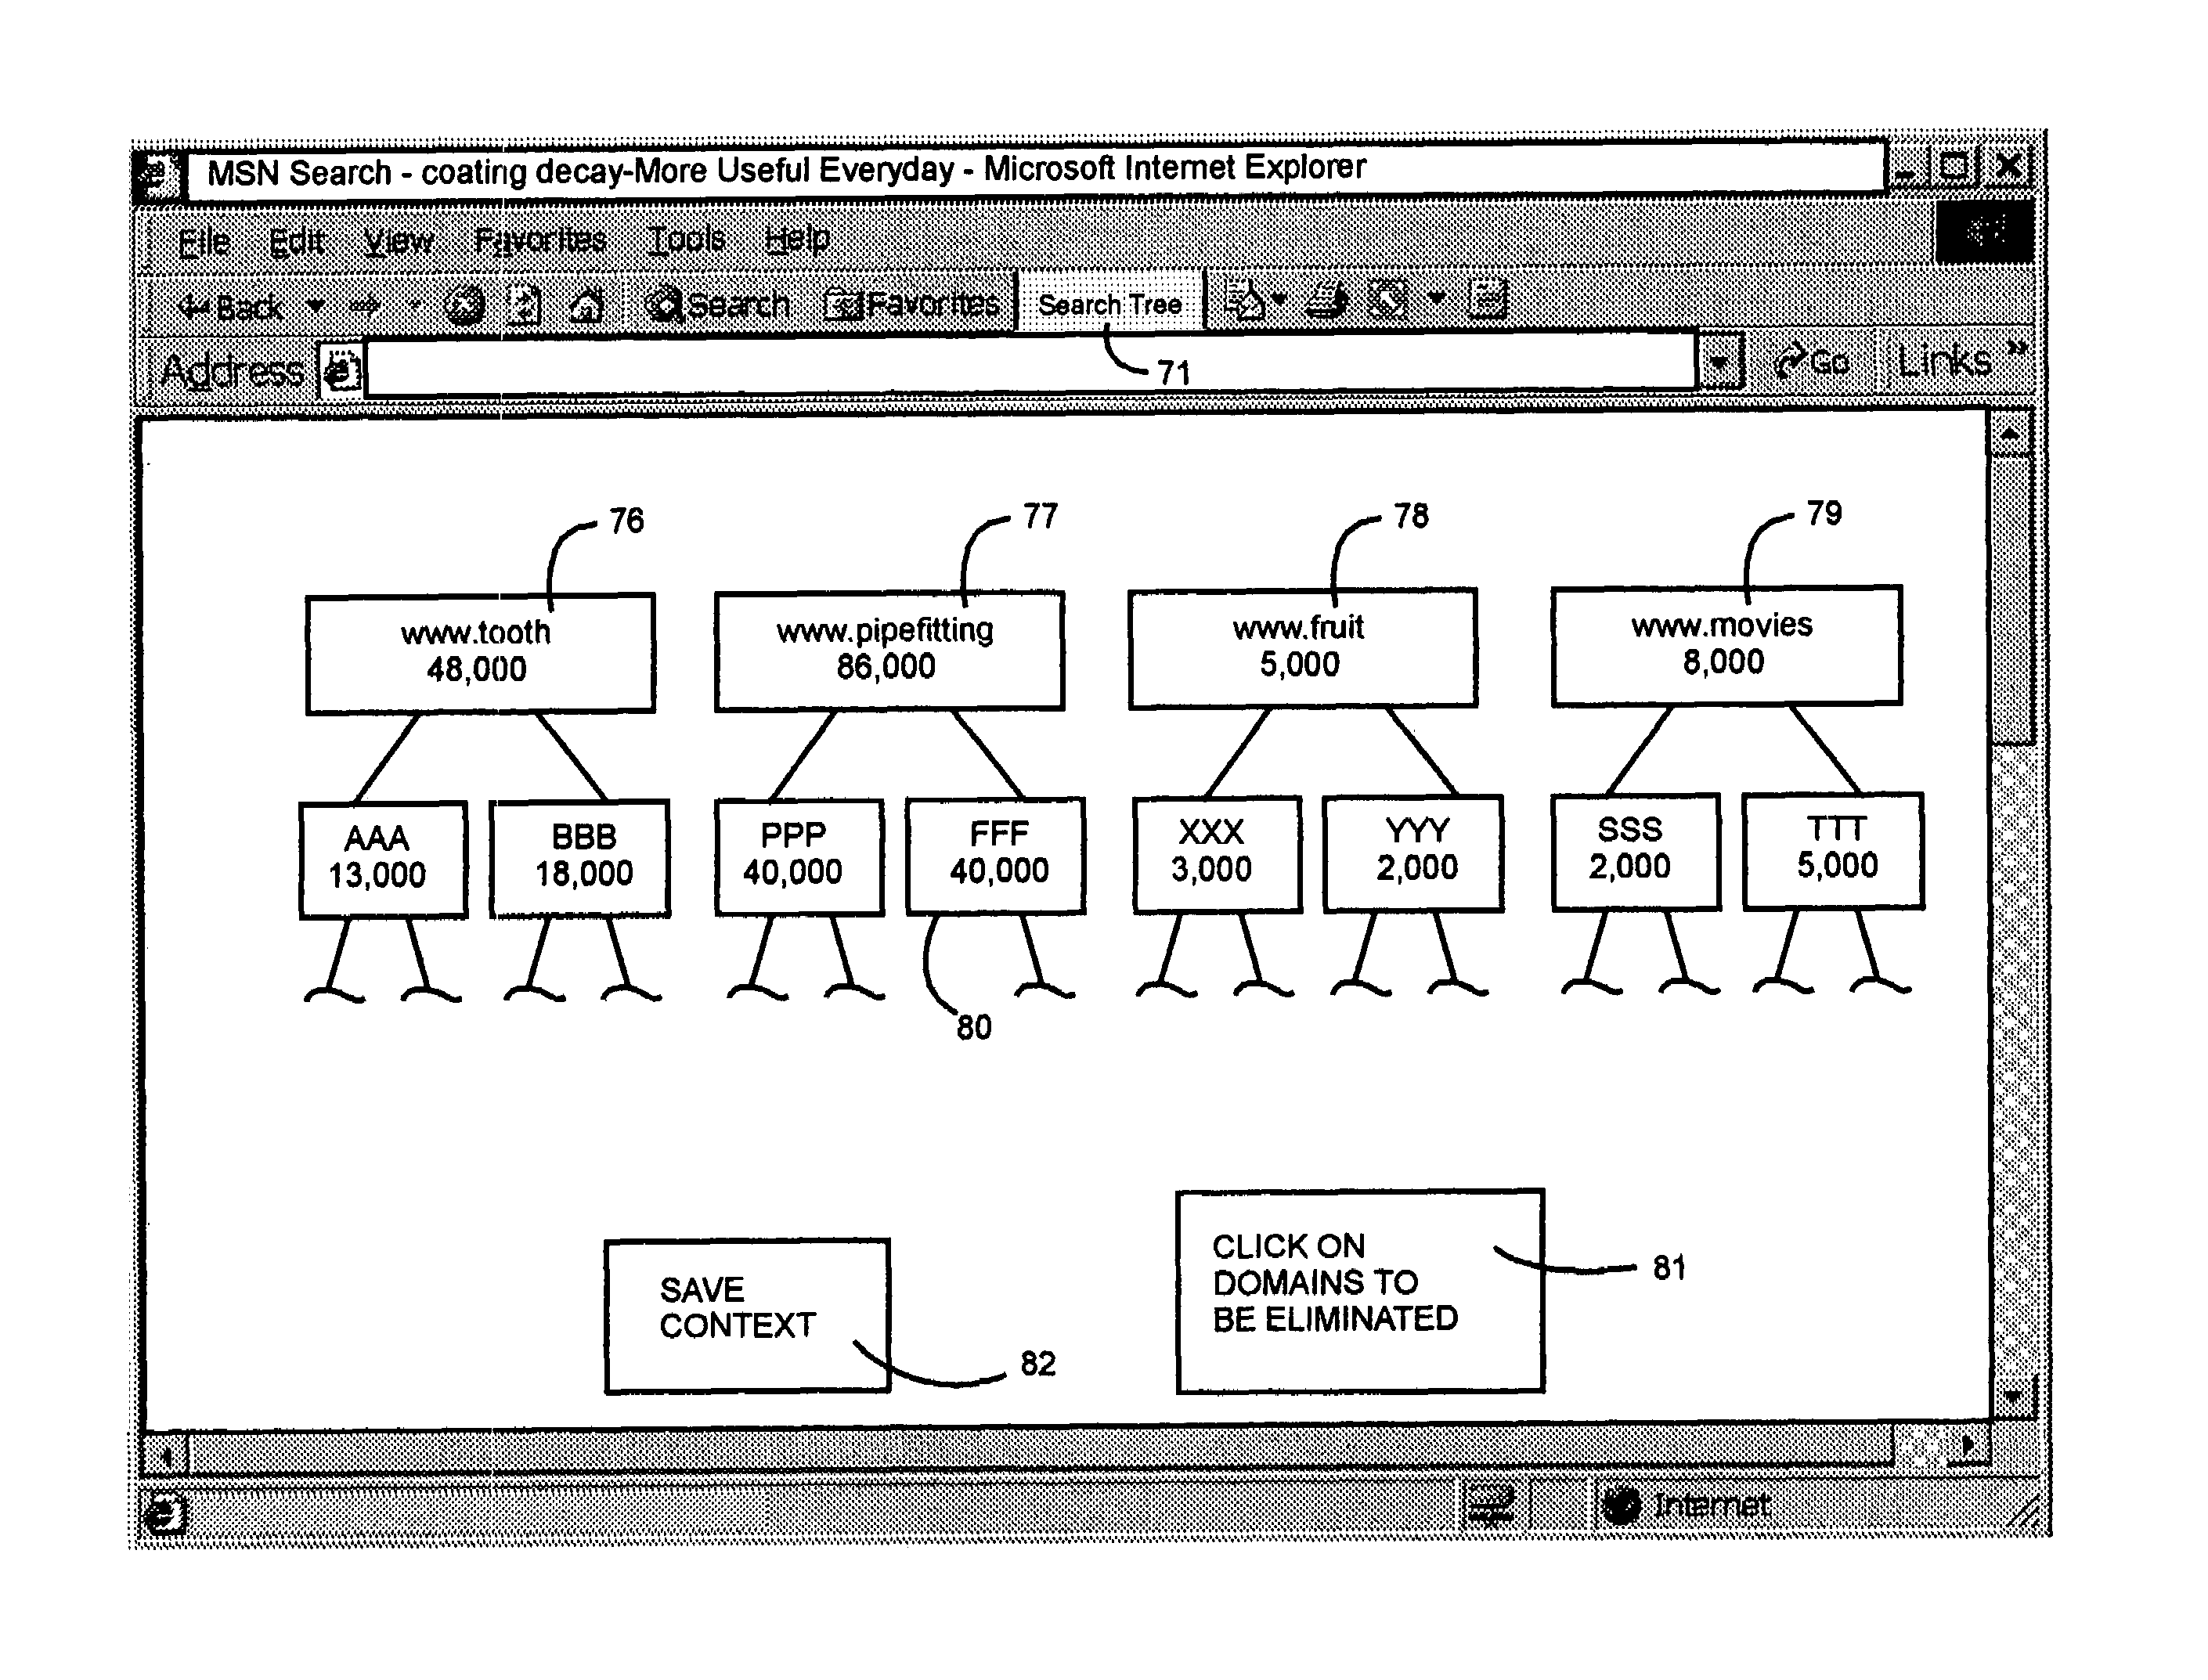 System for conducting searches on the world wide web enabling the search requester to modify the domain context of a search responsive to an excessive number of hits on combinations of keywords